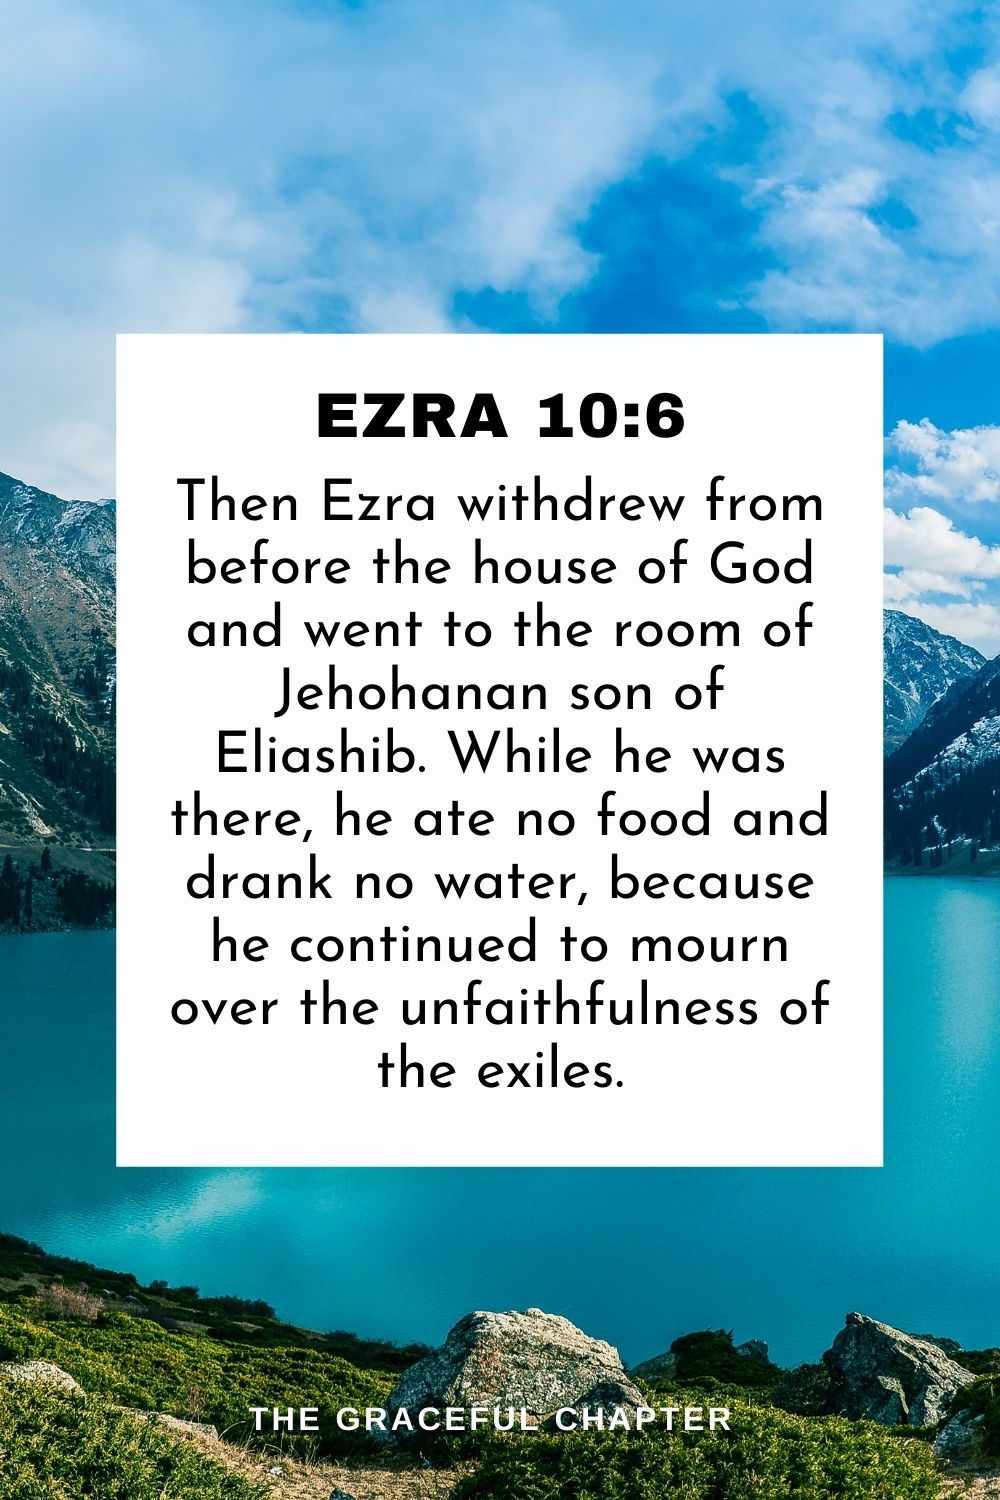 Then Ezra withdrew from before the house of God and went to the room of Jehohanan son of Eliashib. While he was there, he ate no food and drank no water, because he continued to mourn over the unfaithfulness of the exiles. Ezra 10:6